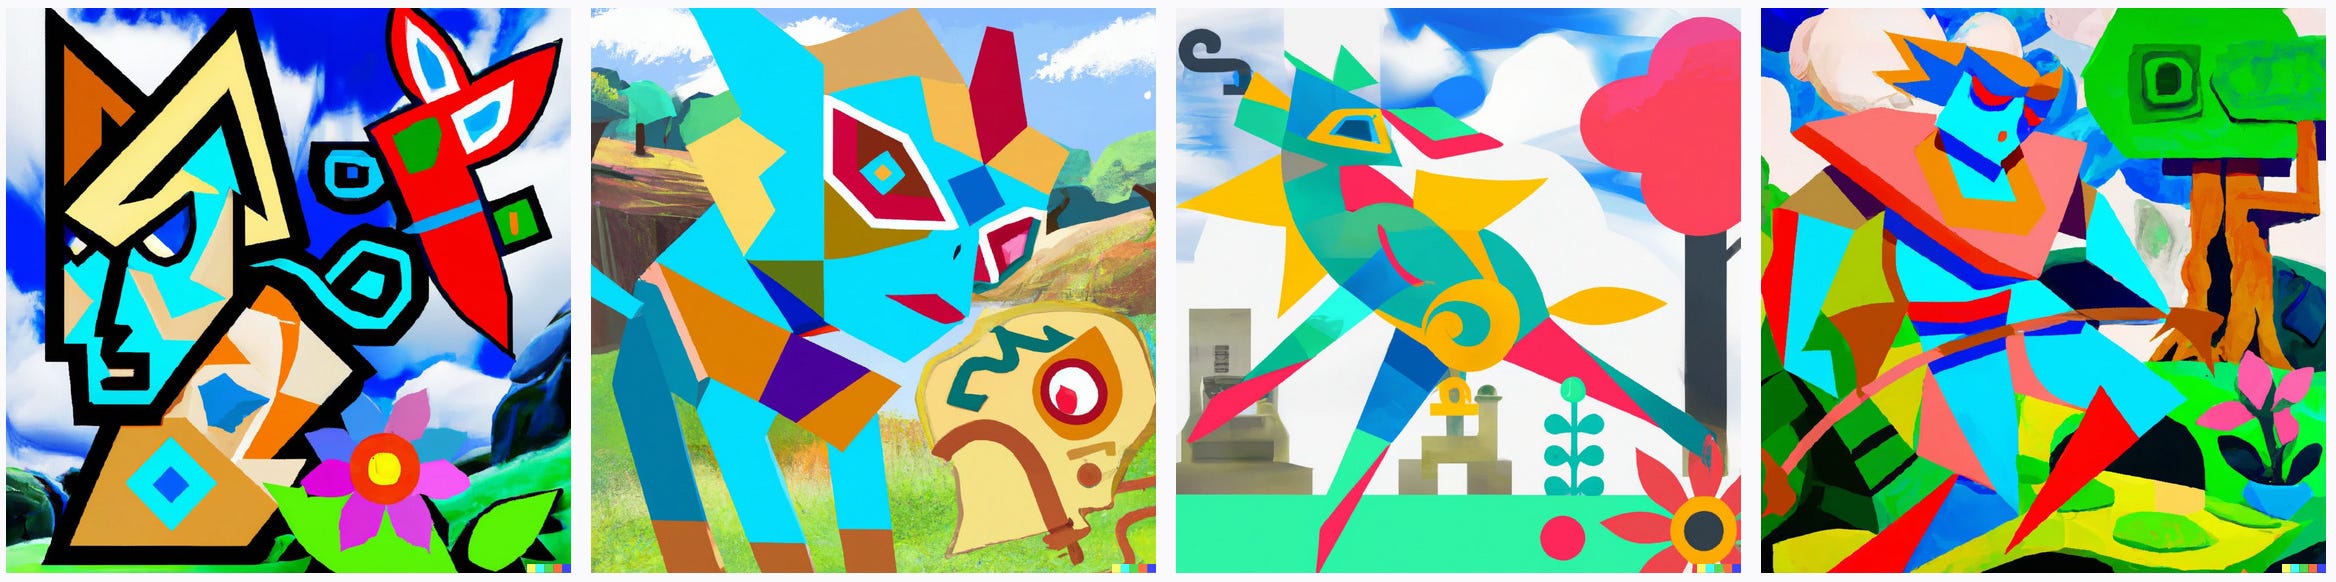 A series of images showing the world of Legend of Zelda, rendered like a Picasso painting.